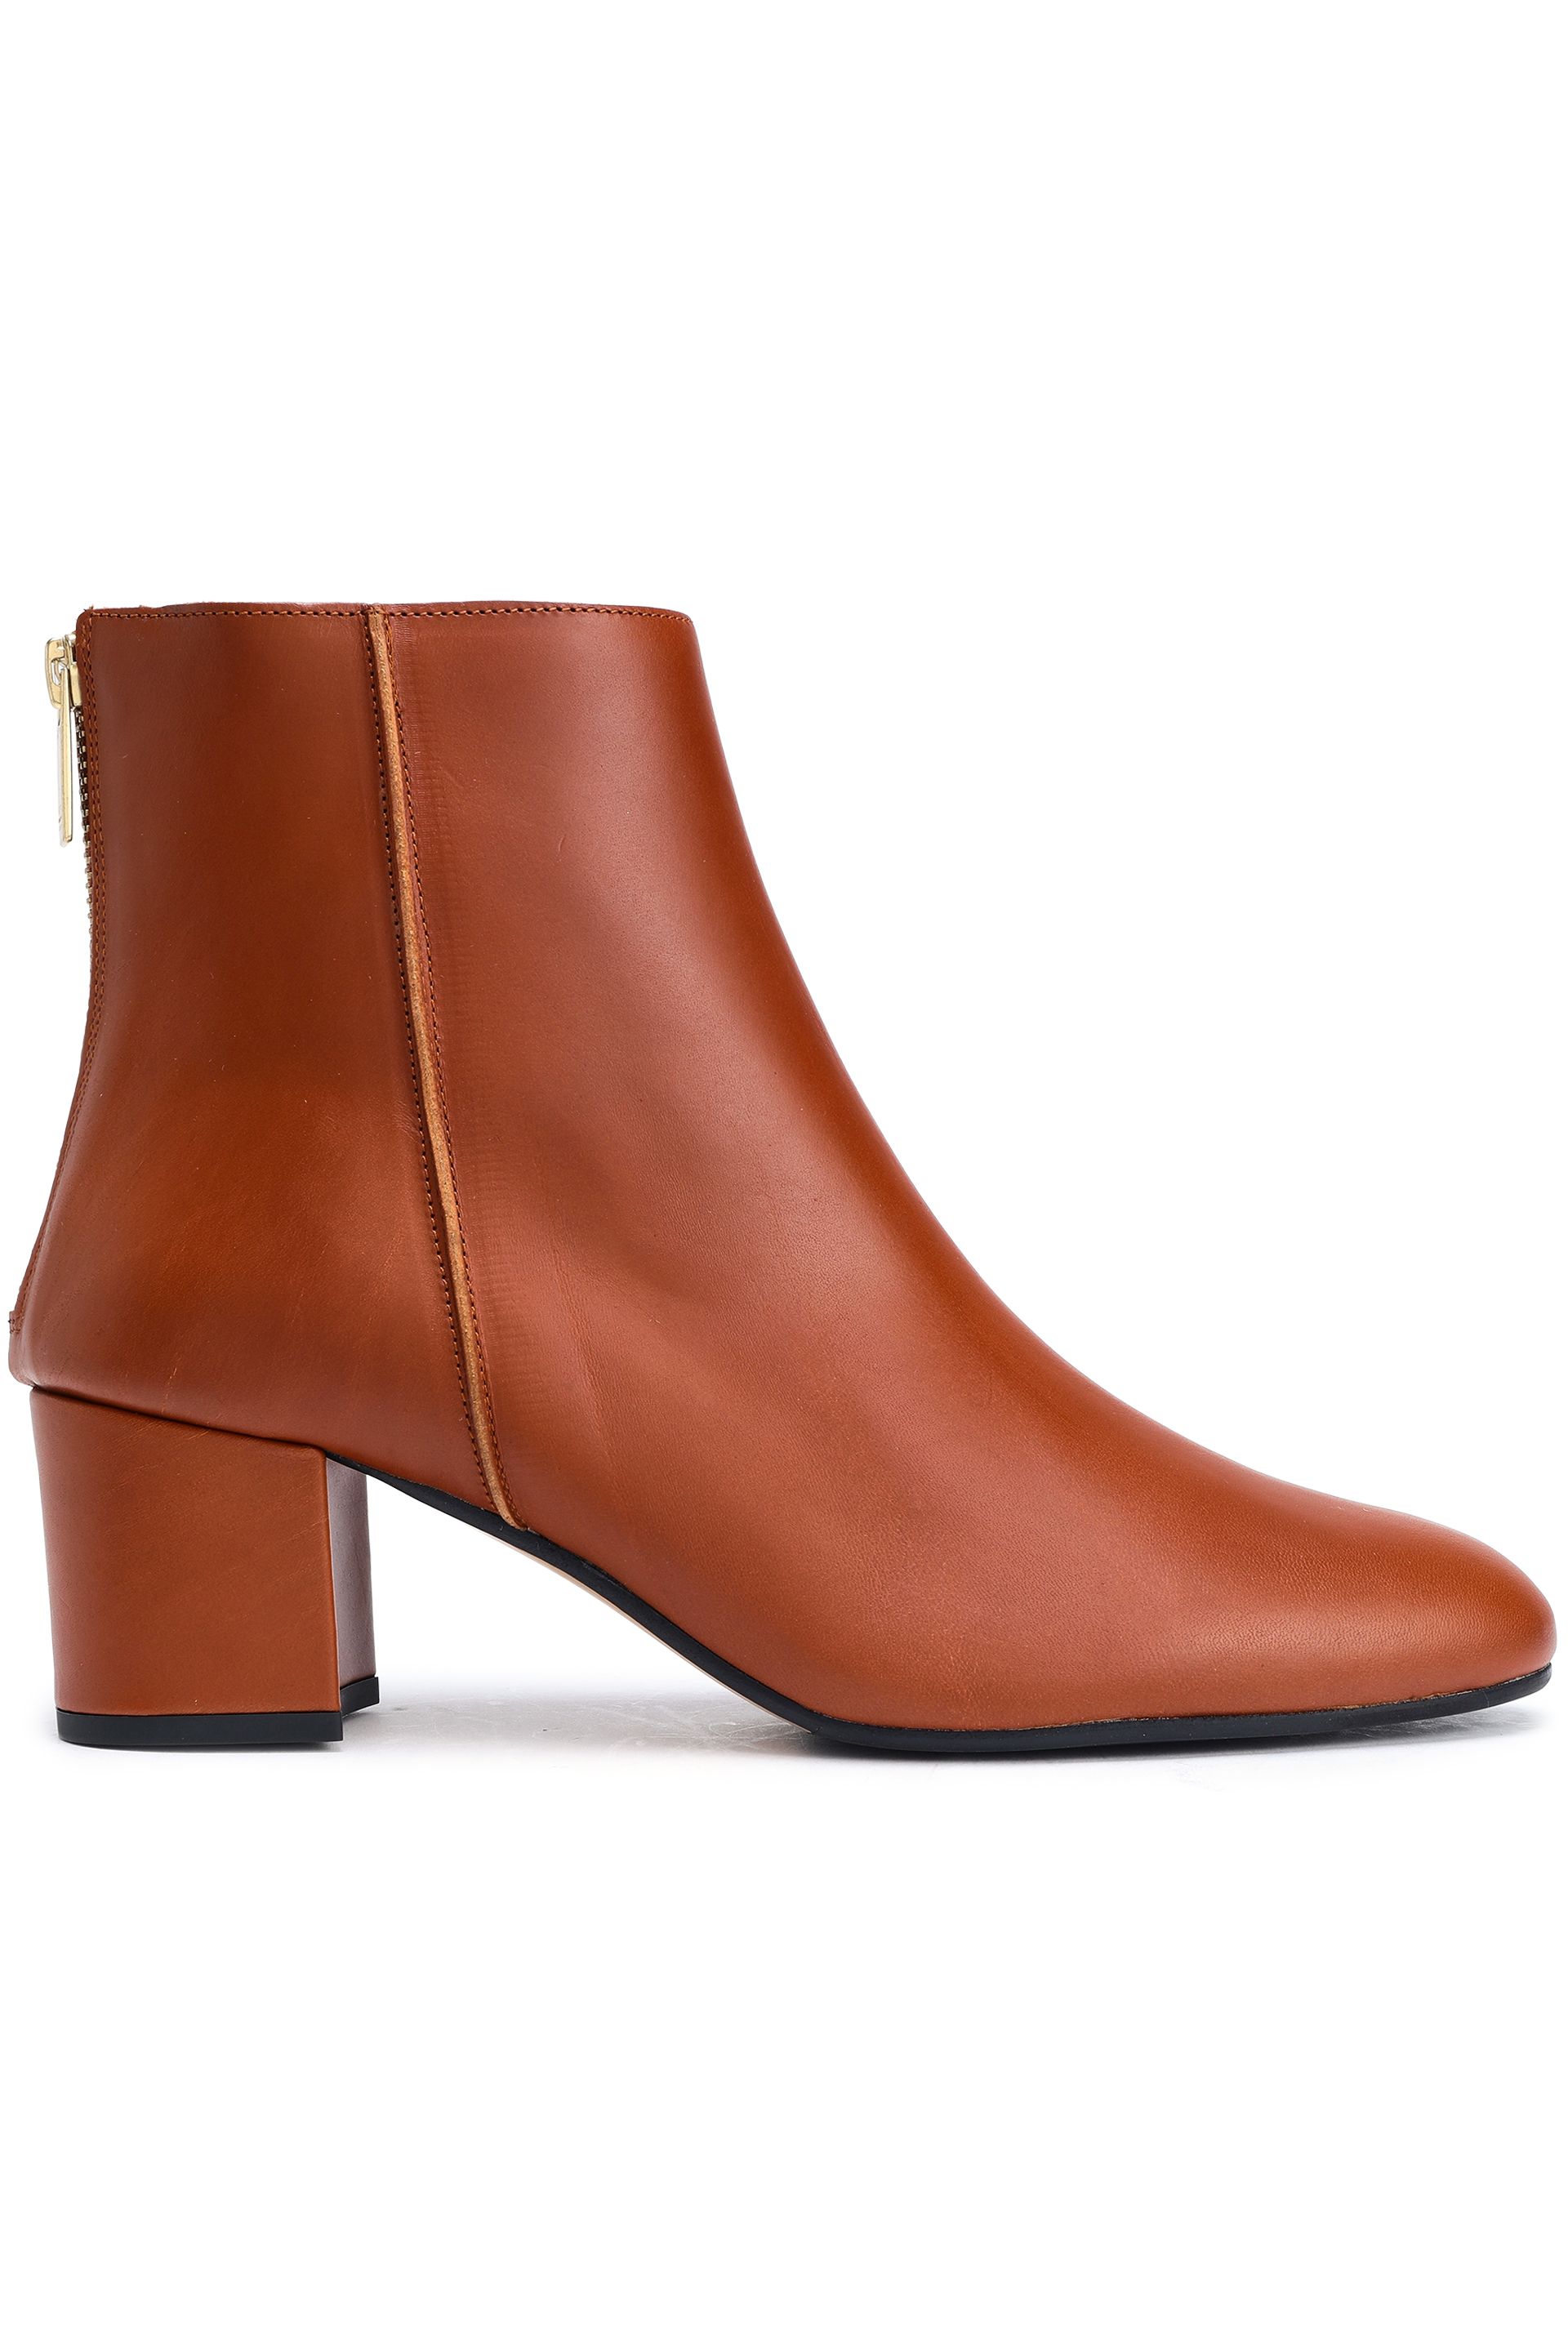 Designer Ankle Boots | Sale Up To 70% Off At THE OUTNET